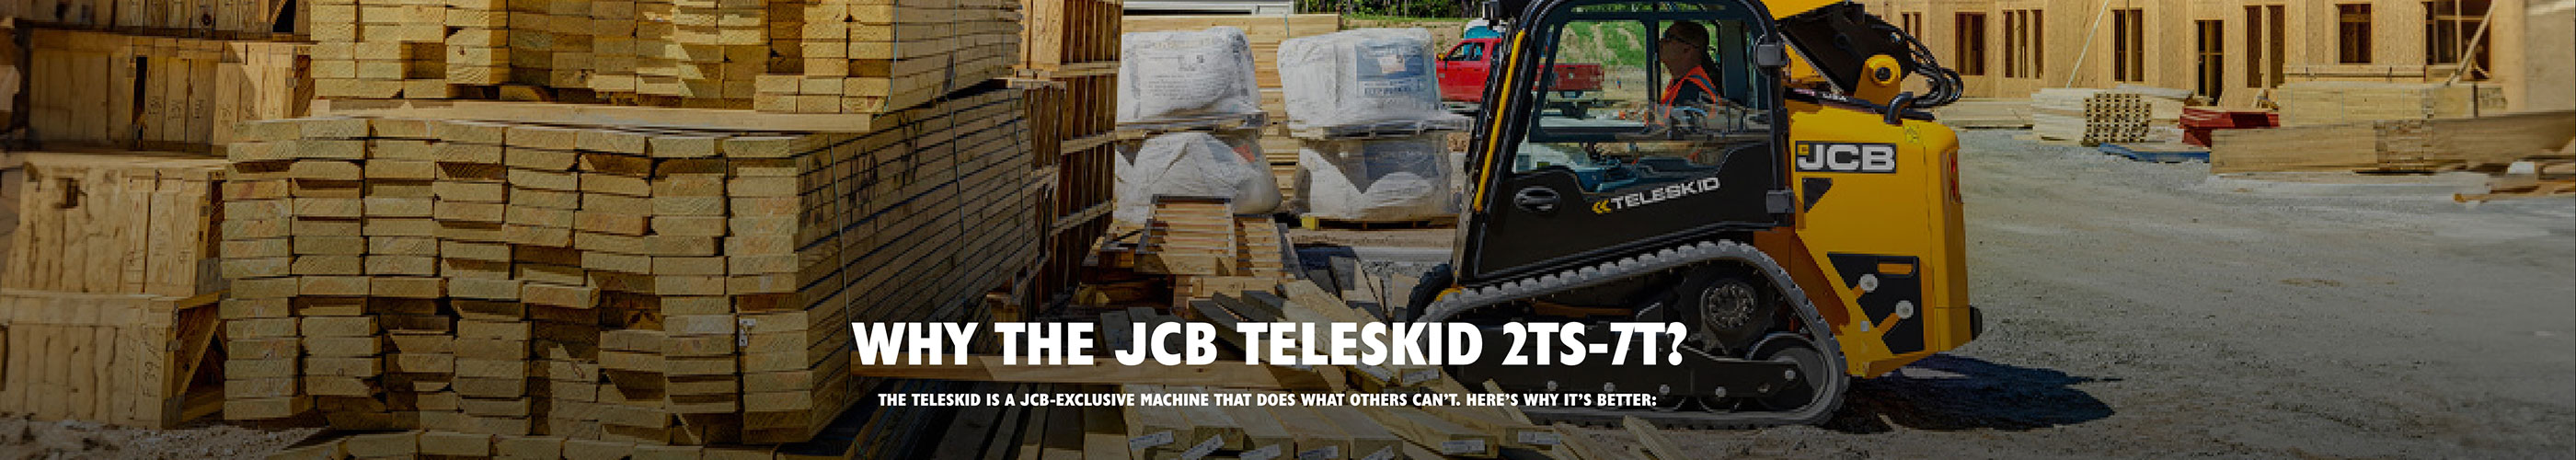 WHY THE JCB TELESKID 2TS-7T? THE TELESKID IS A JCB-EXCLUSIVE MACHINE THAT DOES WHAT OTHERS CAN'T. HERE'S WHY IT'S BETTER: